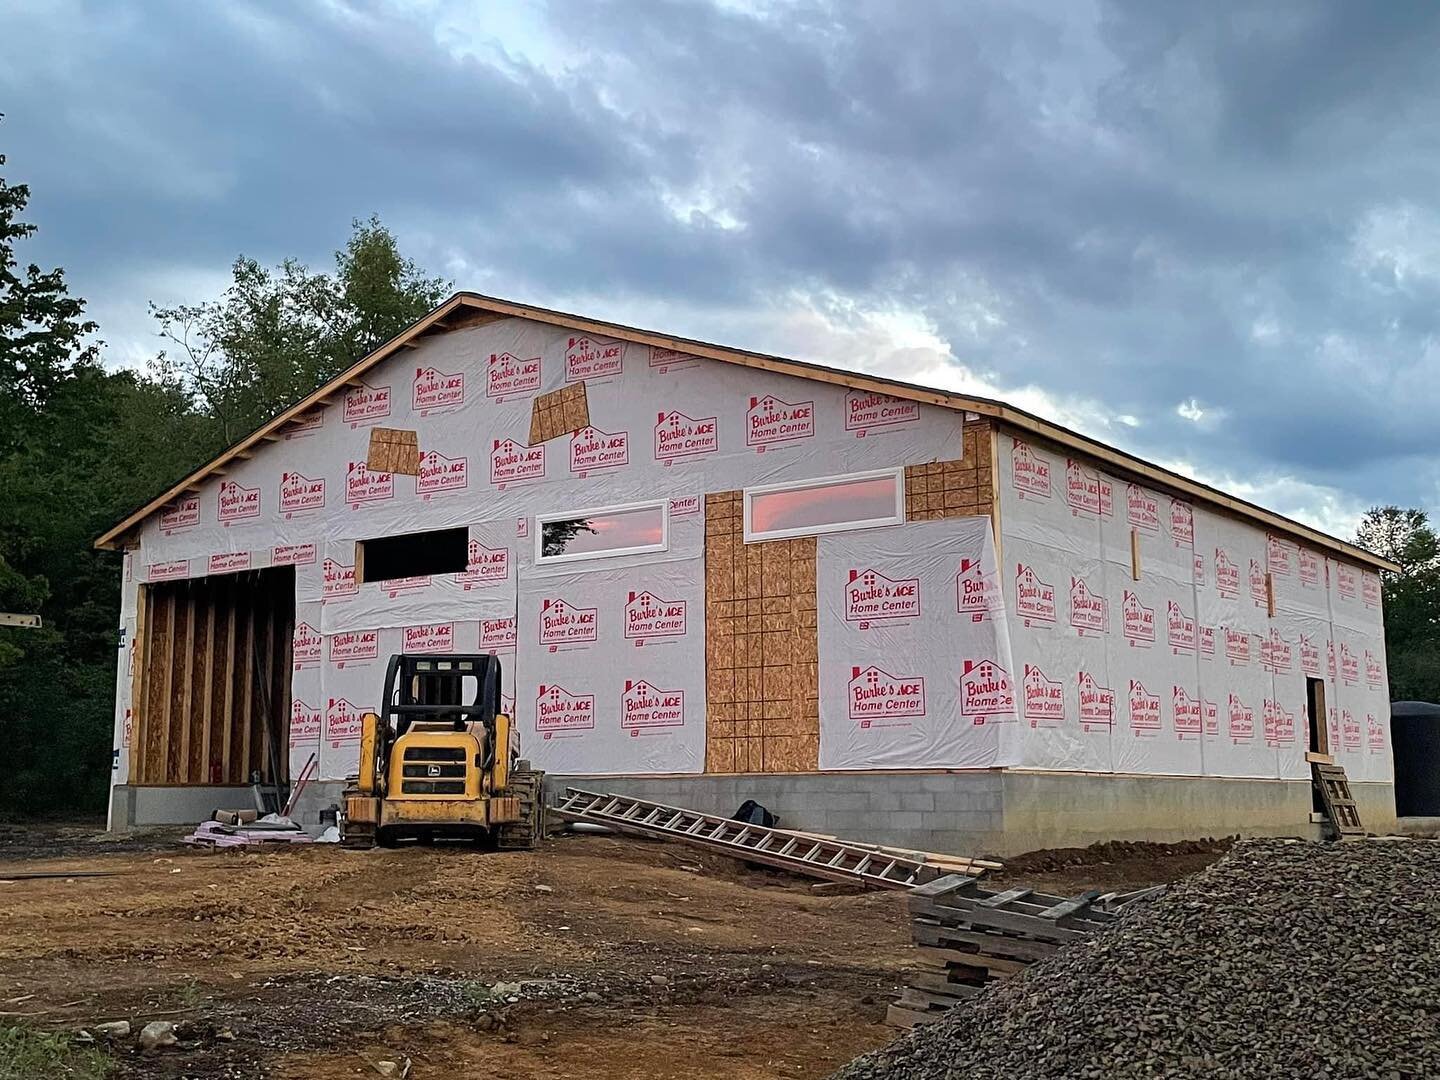 🤔 Incase you were wondering what&rsquo;s going from behind CHD&hellip;
 Well, because of GREAT CUSTOMERS 
CHD is expanding in multiple ways!!
-A new manufacturing and bottling building to service our growing customers base!
-CHD @ Gettysburg will be